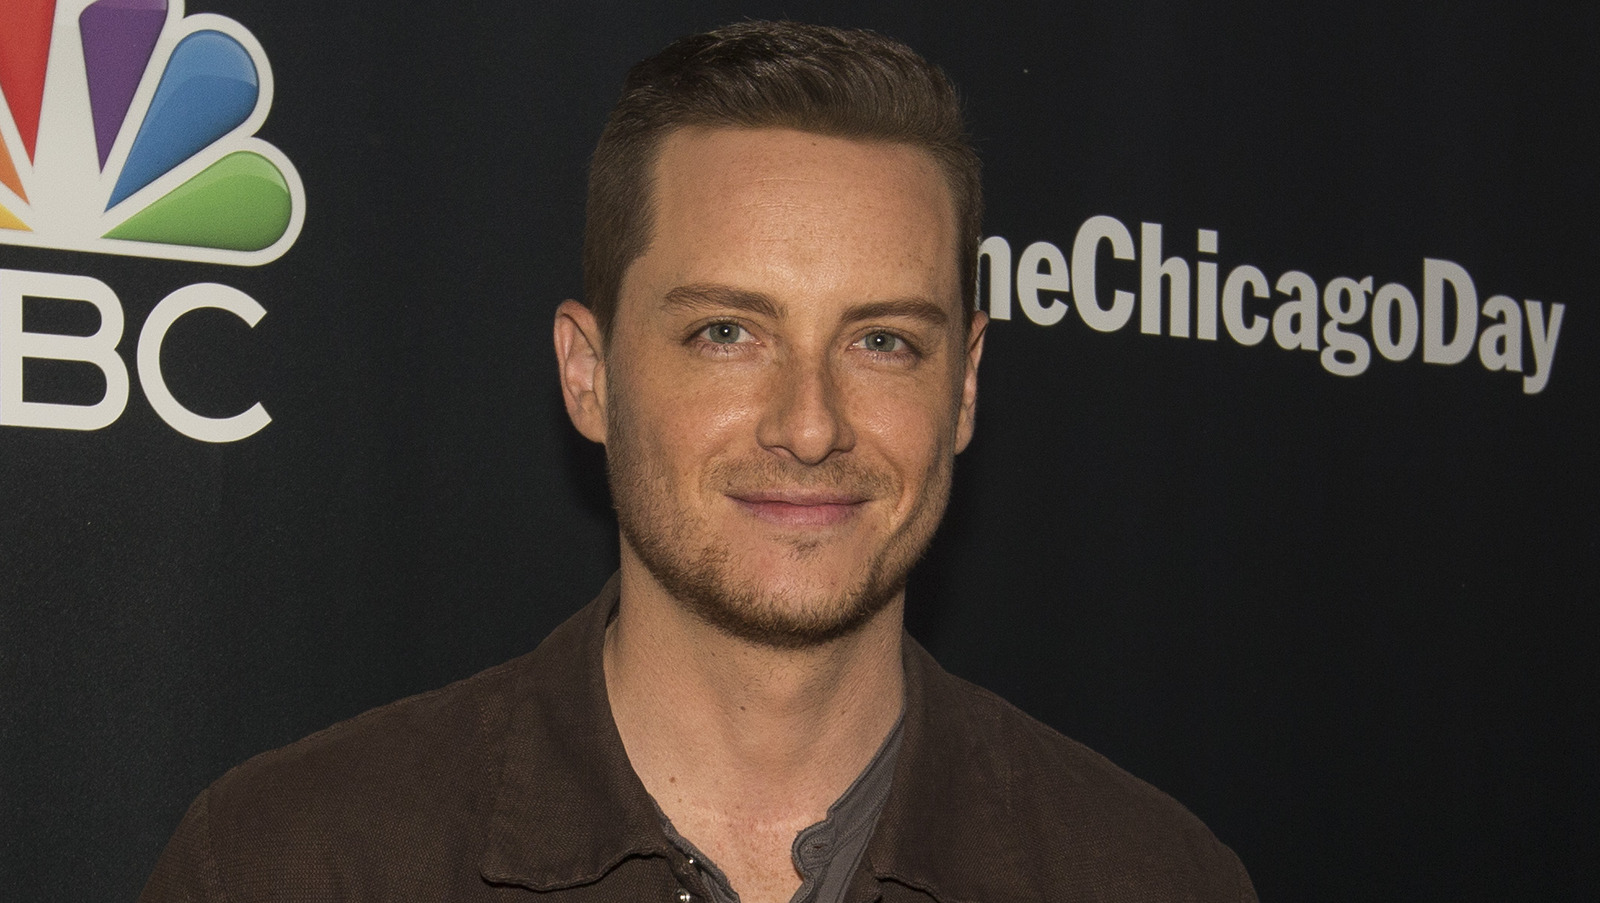 What Jesse Lee Soffer Has Been Up To Since His Exit From One Chicago